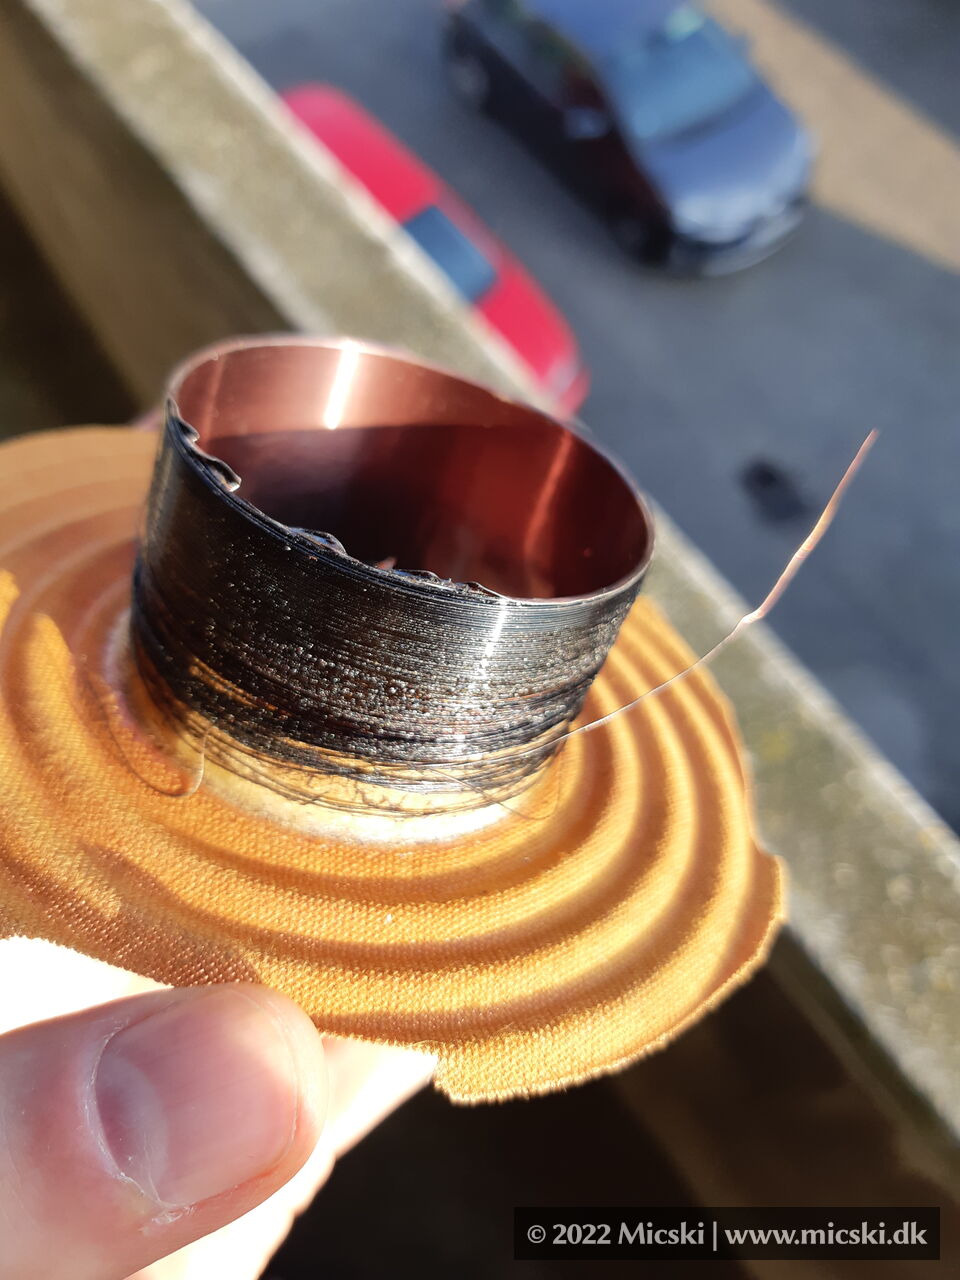 Picture of Cerwin-Vega AL-1002 voice coil, that is burned due to overheating.